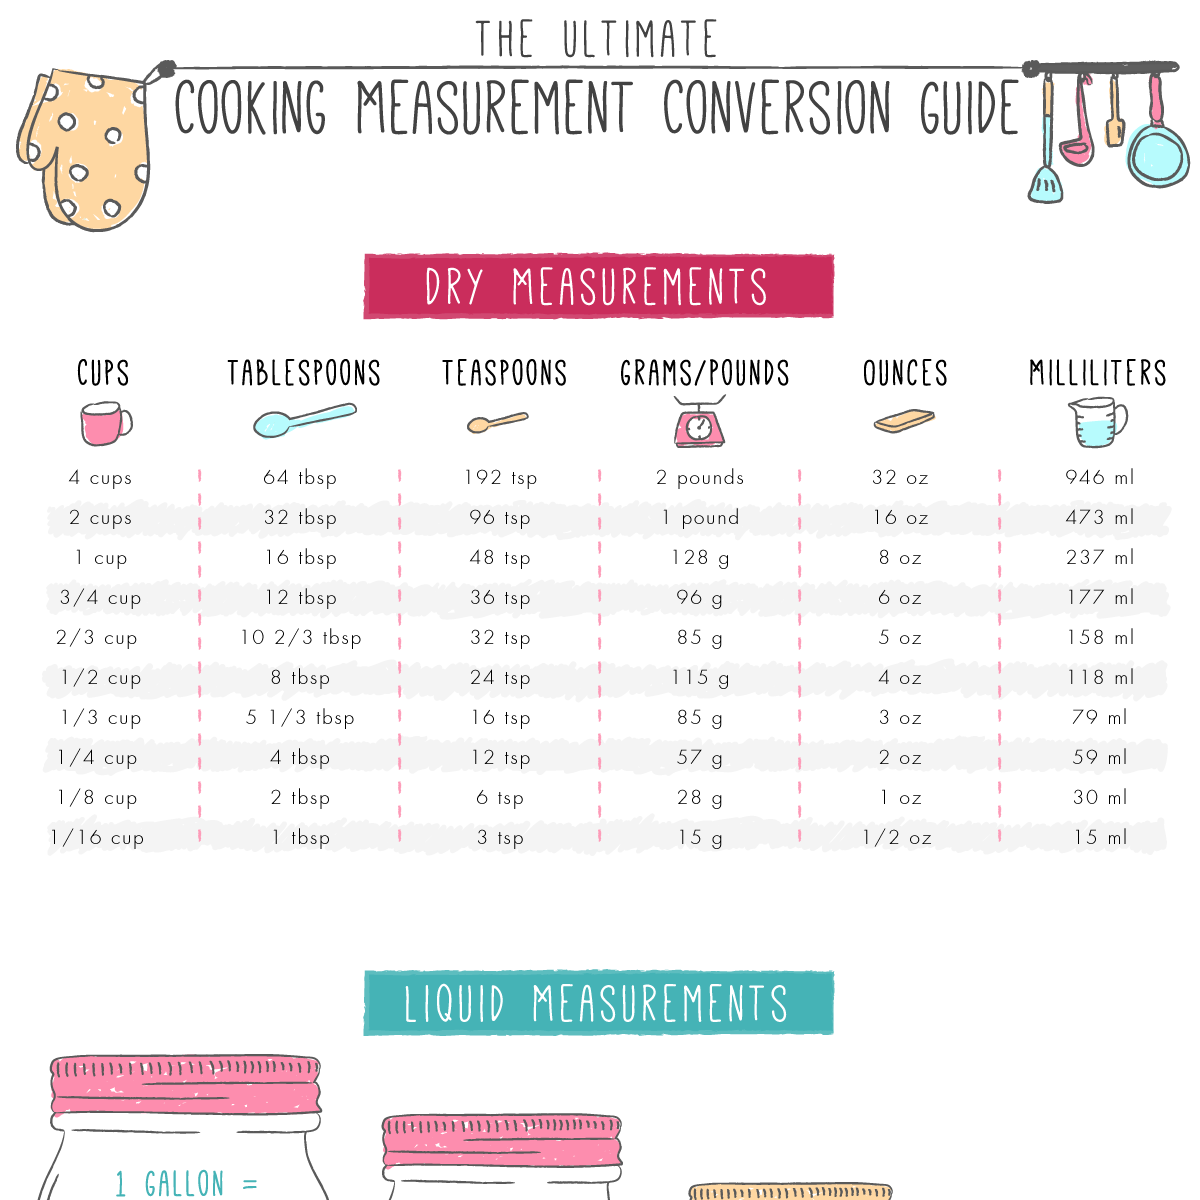 https://www.howtocook.recipes/wp-content/uploads/2021/11/cooking-measurement-coversion-guide-4_thumb.png